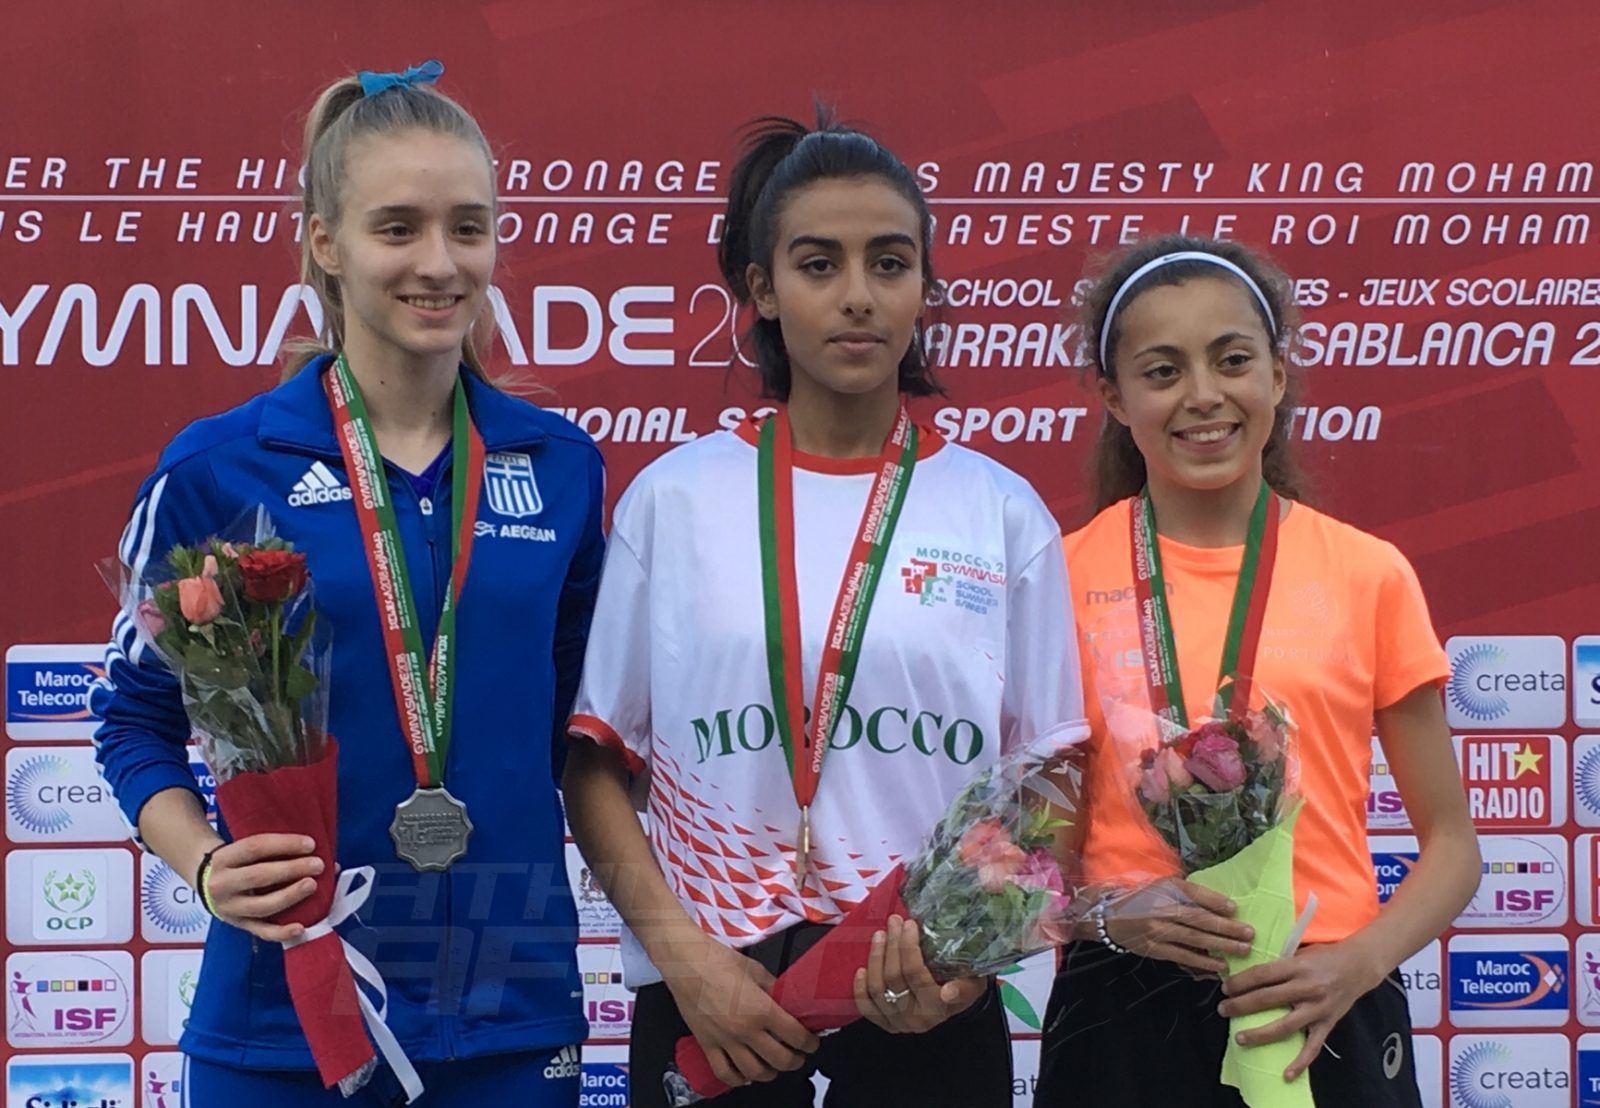 Morocco's Yassmine Bidkane (Centre) flanked by silver medallist Konstantina Chantzou (Greece) and bronze medallist Ines Borba (Portugal) during the medal presentation of Girls 1500m Final at the Gymnasiade 2018 in Marrakech / Photo Credit: Yomi Omogbeja